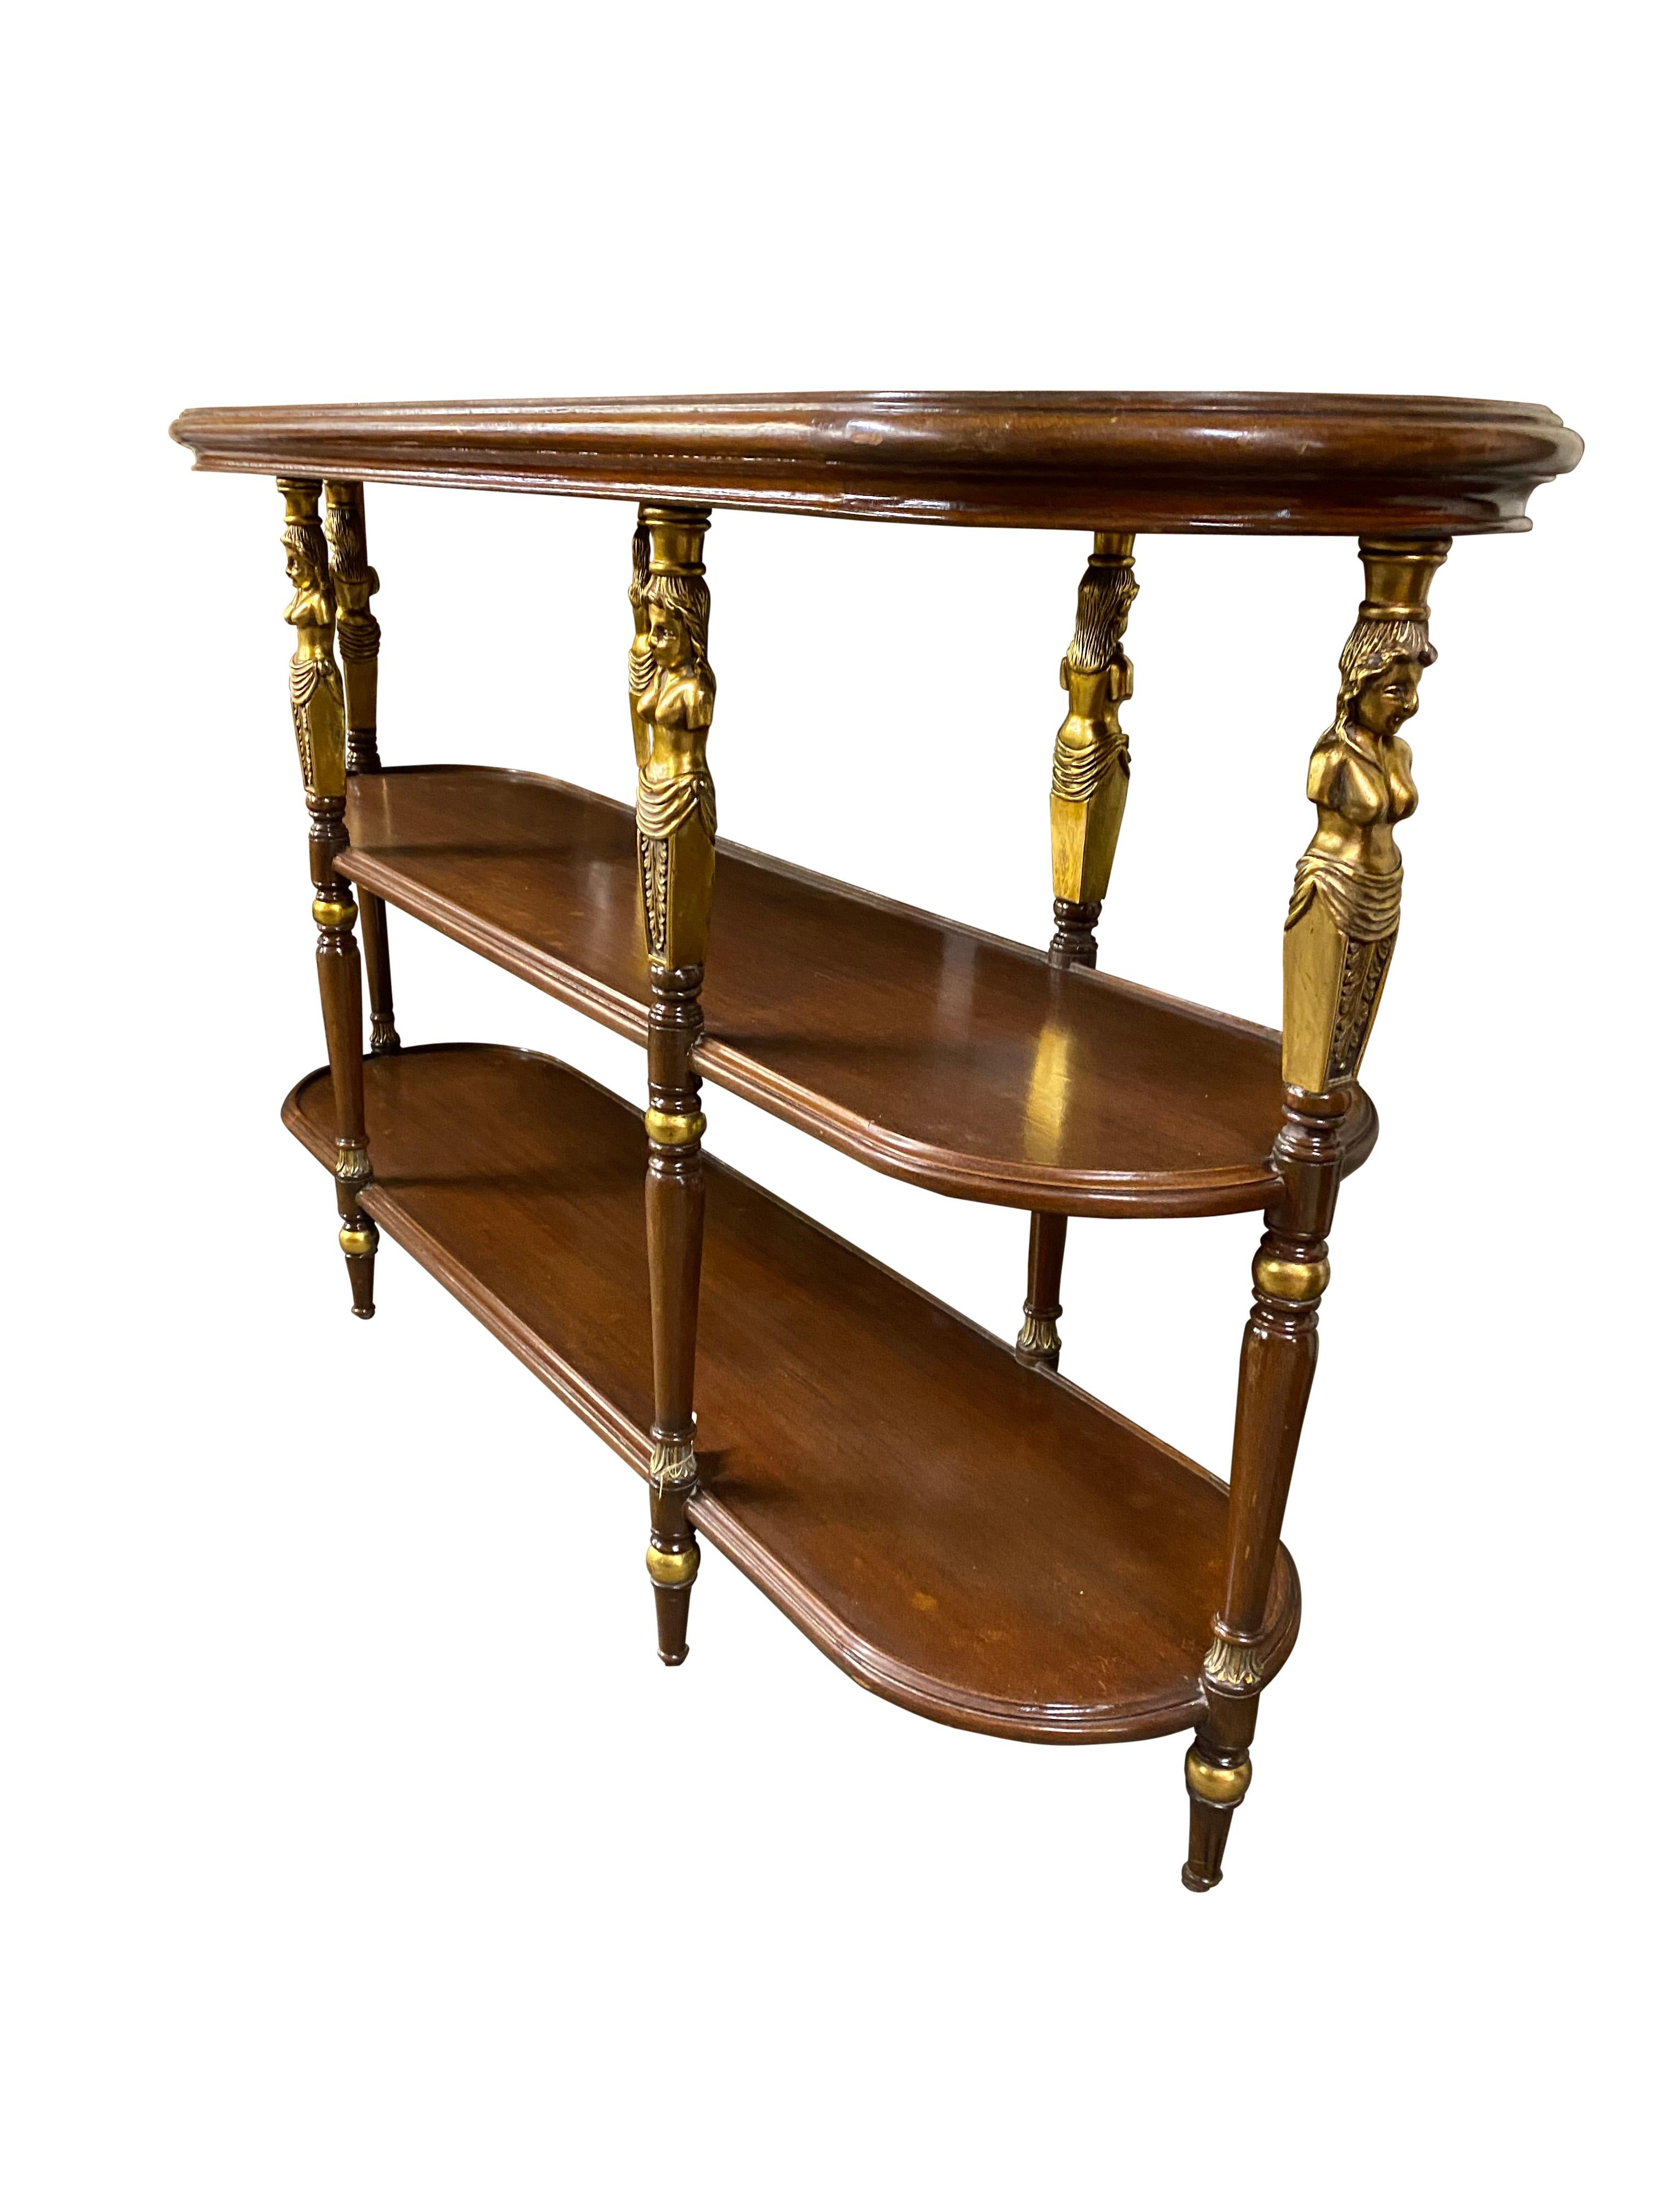 20th Century French Empire Style Open Bookcase/Etagere Tiered Table For Sale 2